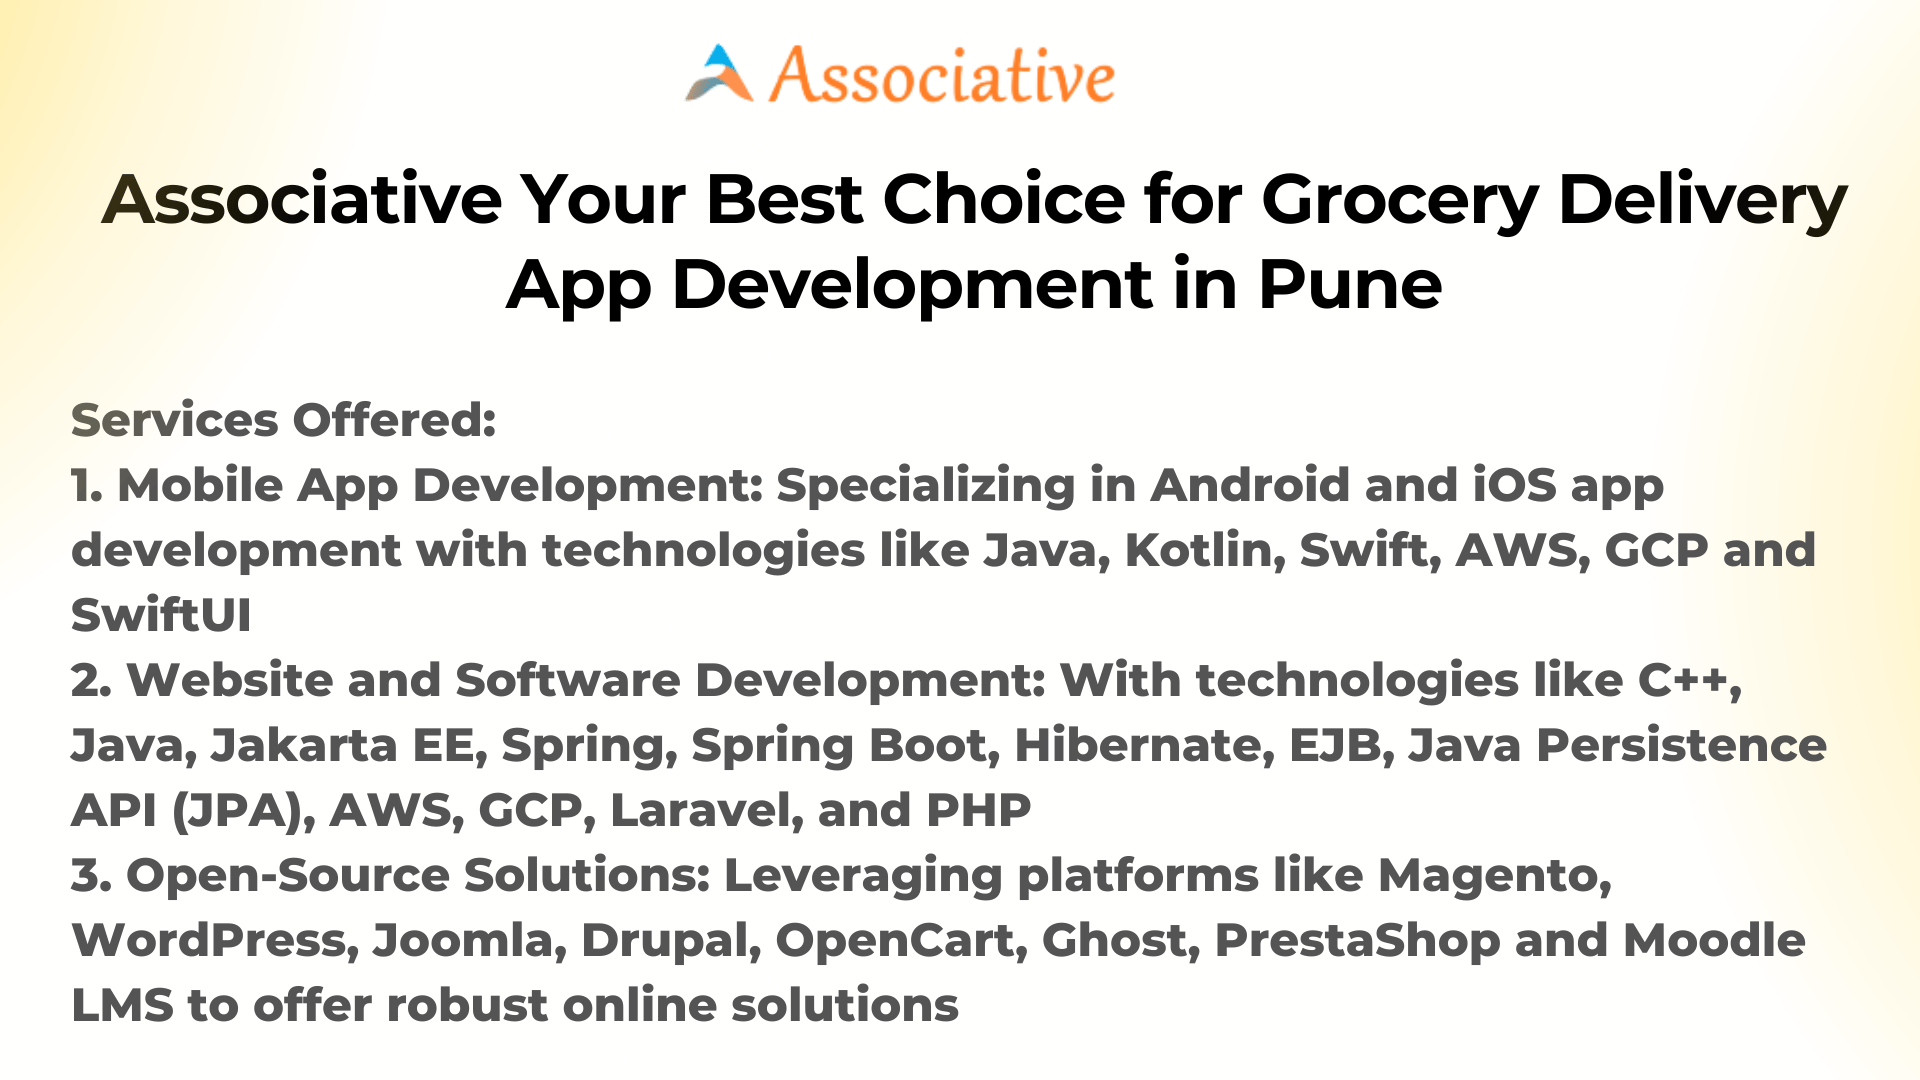 Associative Your Best Choice for Grocery Delivery App Development in Pune